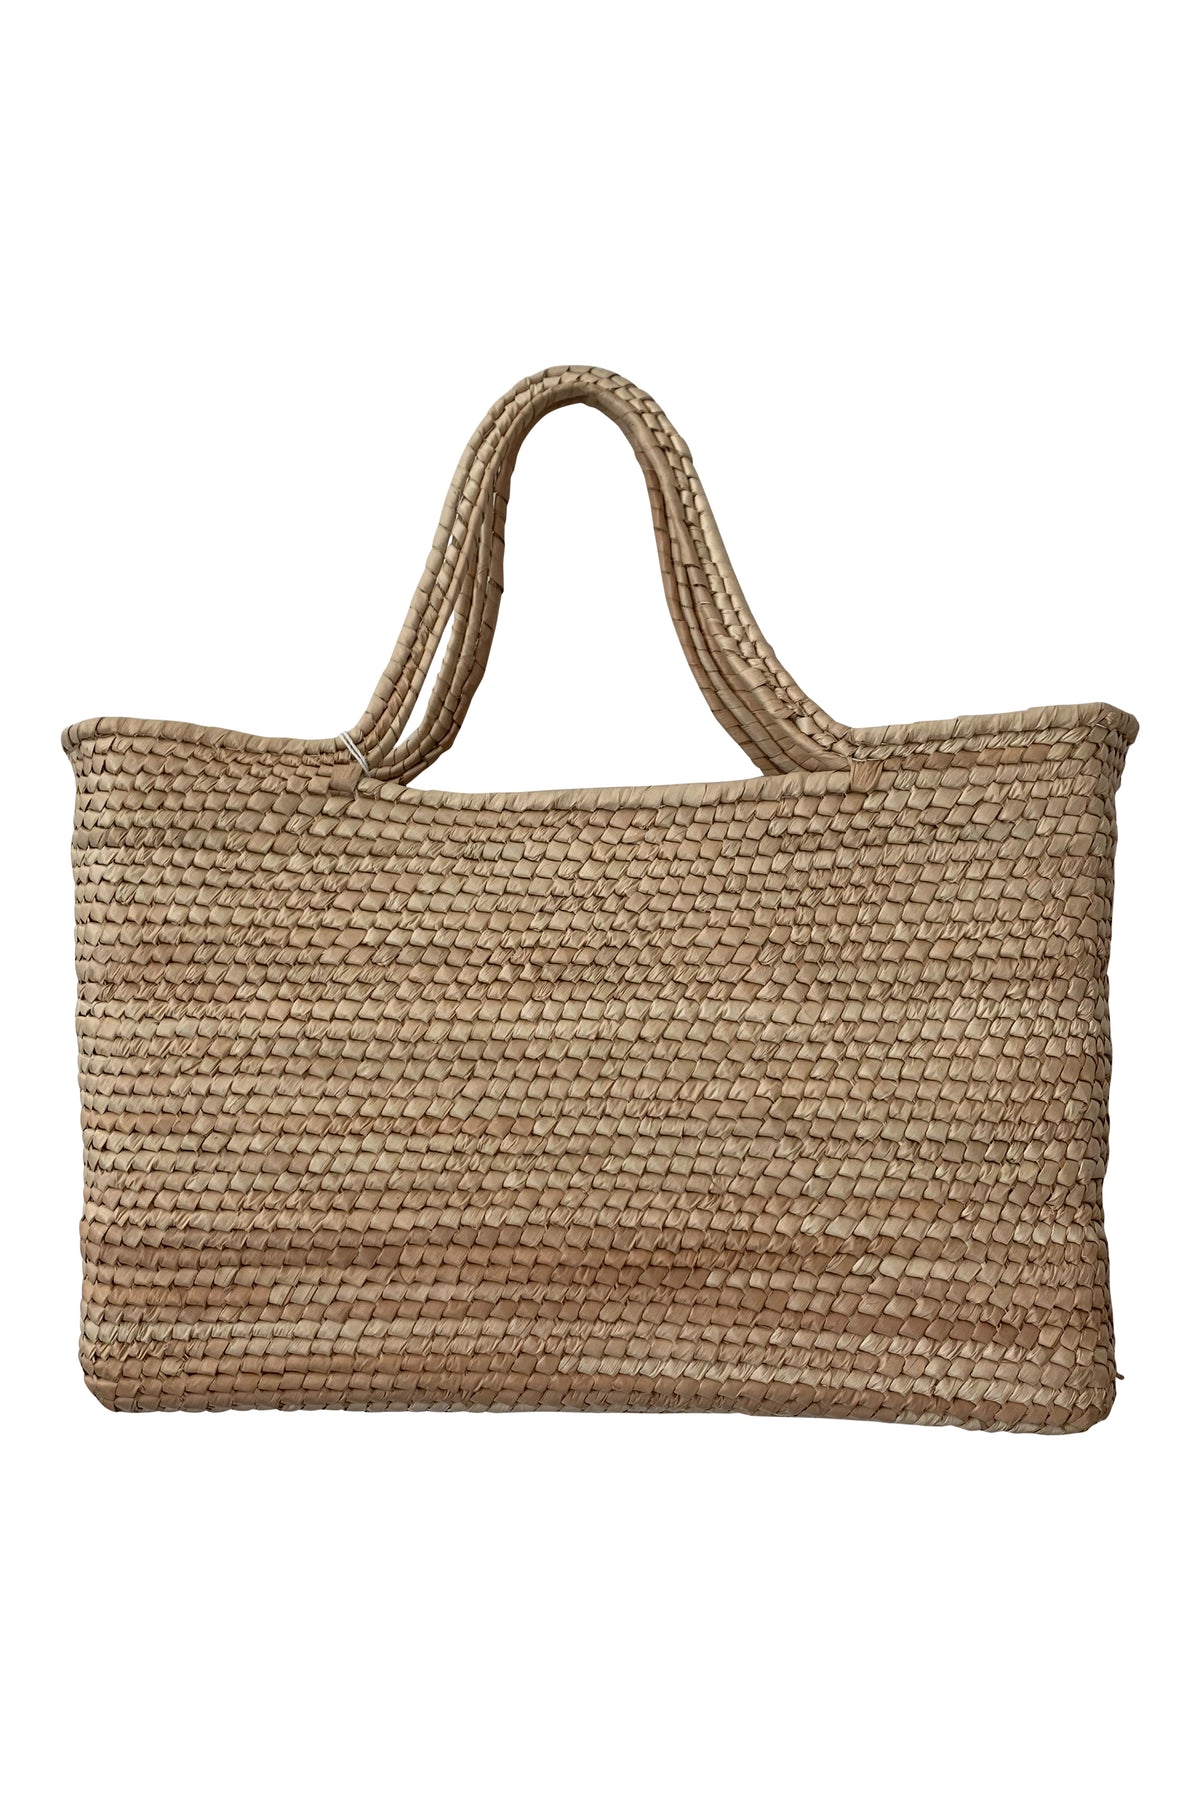 SEEKER HANDWOVEN SMALL STRAW TOTE